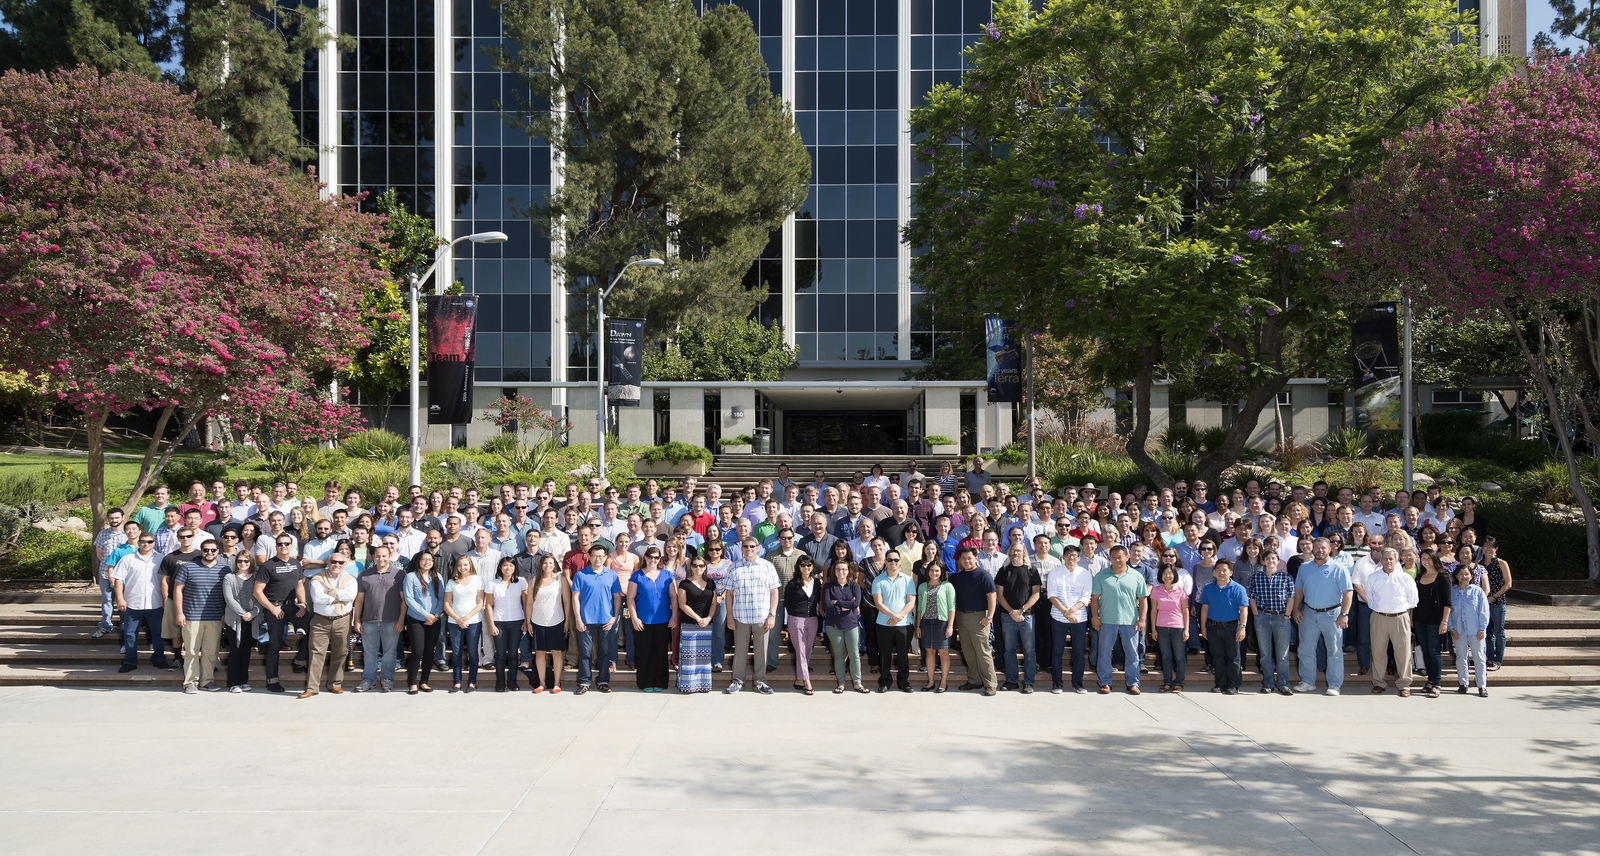 About 100 team members stand in a group photo in front of the steps of a large administration building.